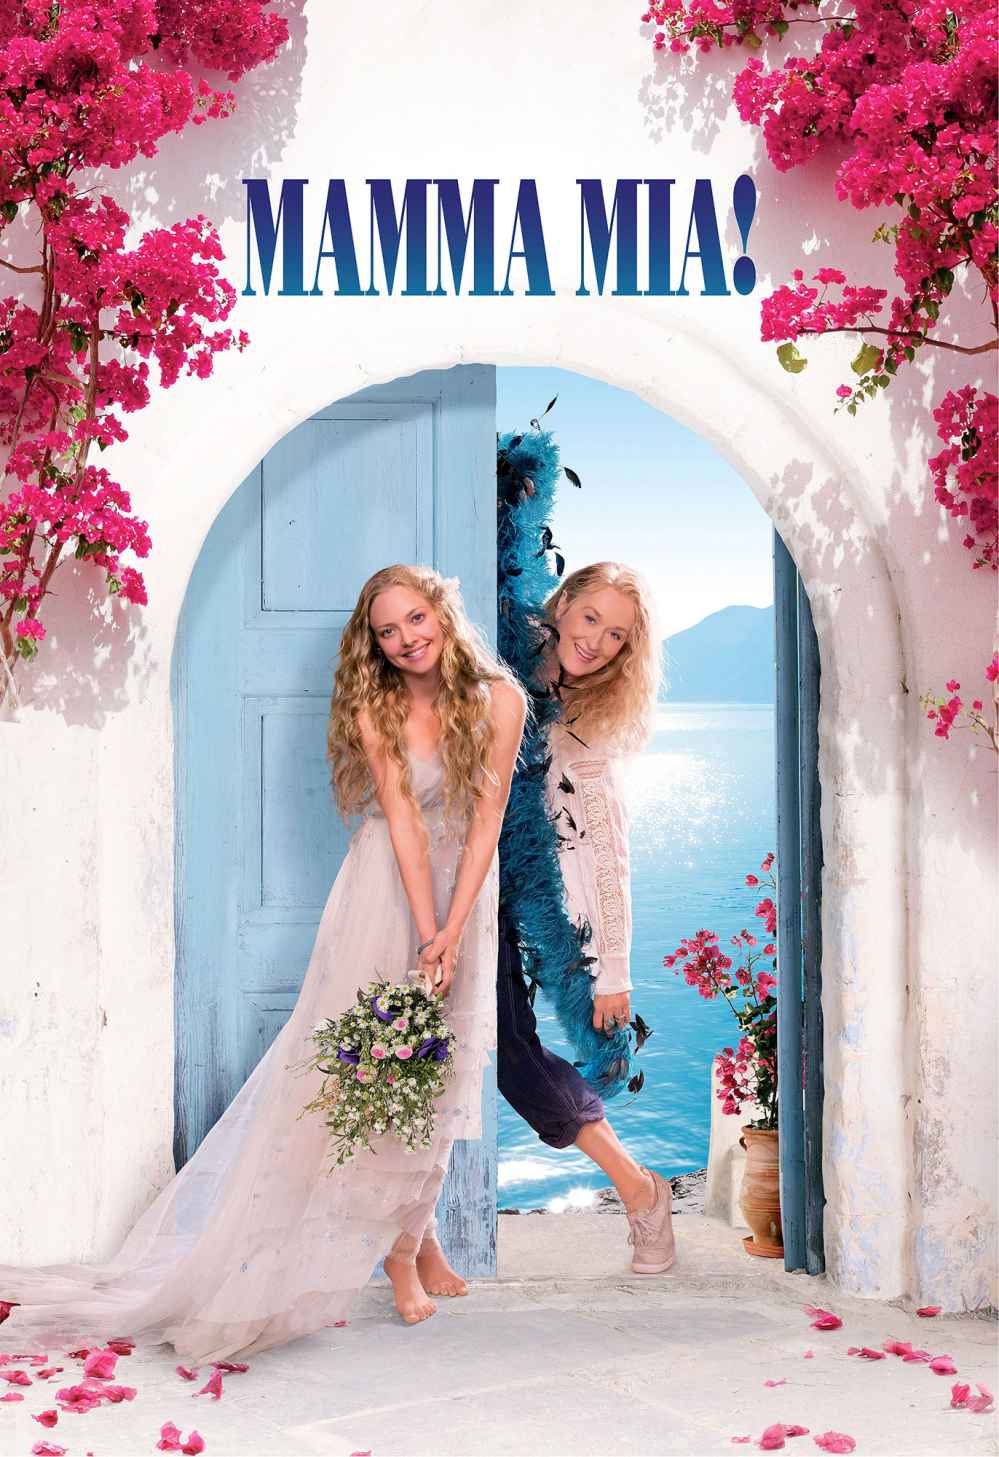 Mamma Mia - latest news, breaking stories and comment - The